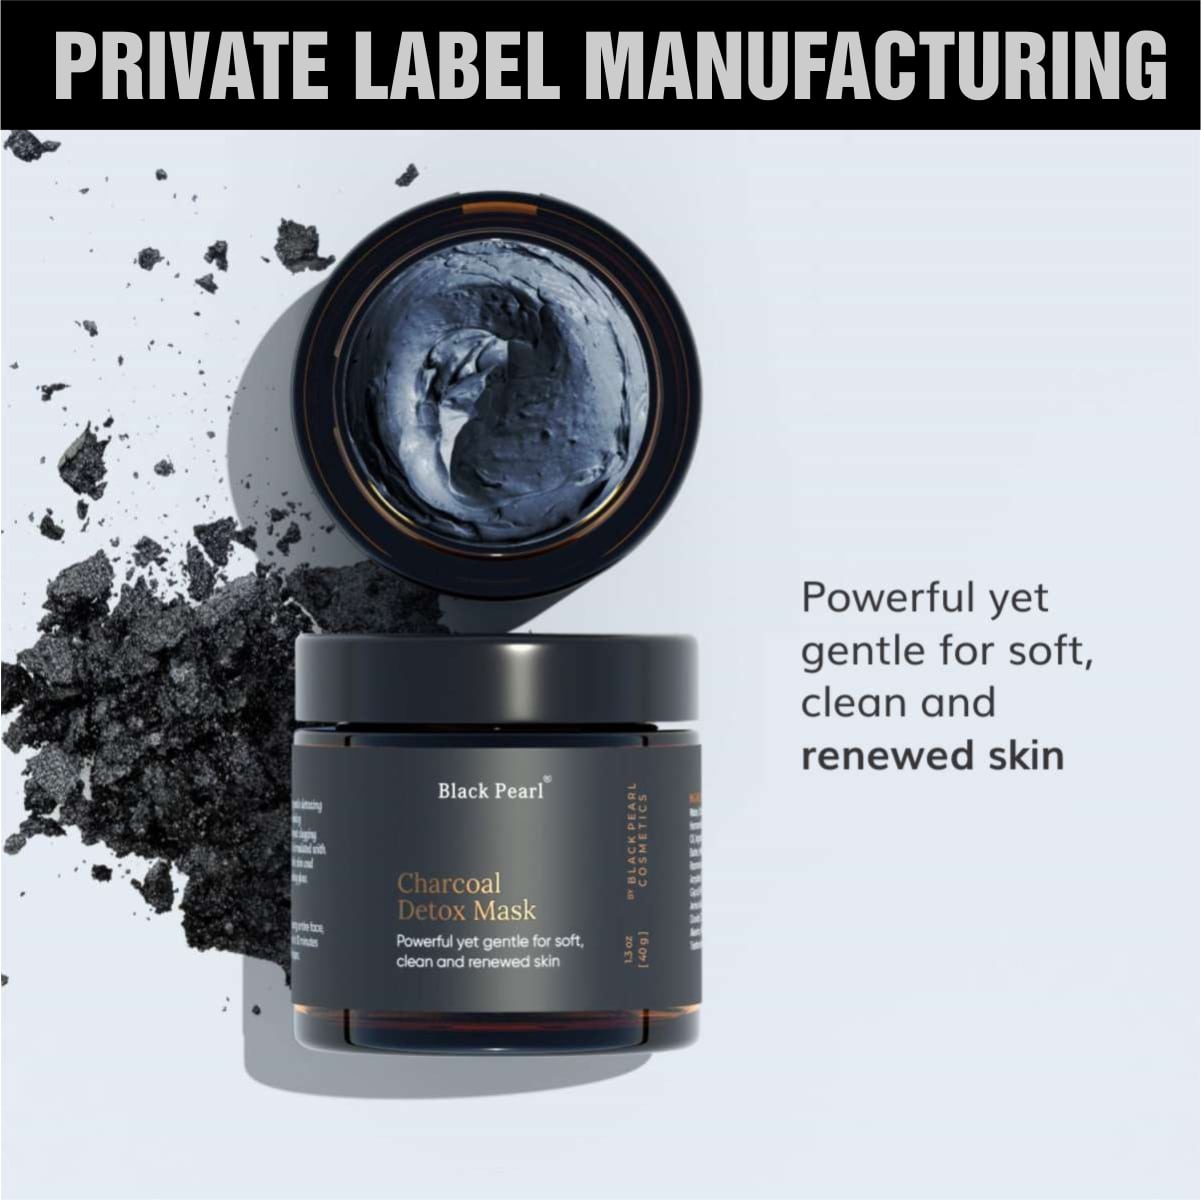 Charcoal Detox Mask Private Label Manufacturing